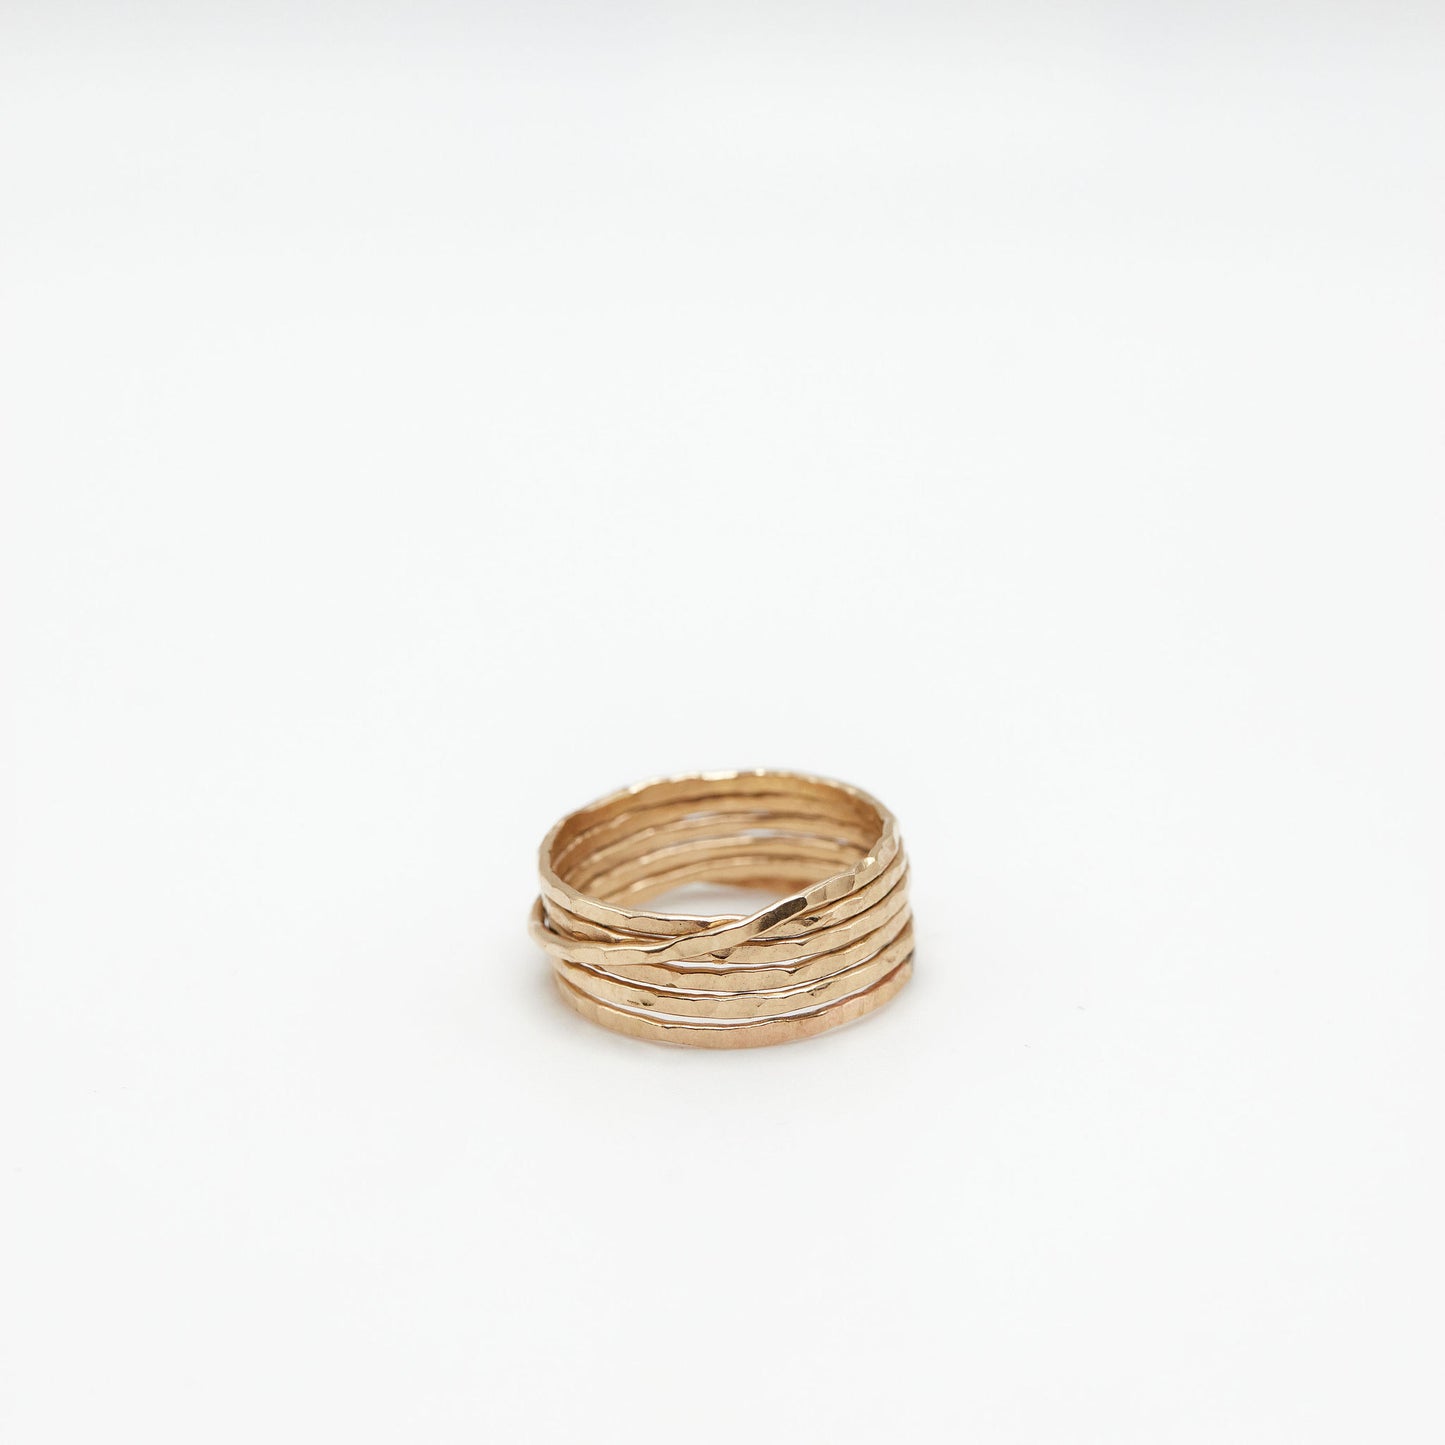 Silver+Gold Wrapping Bands